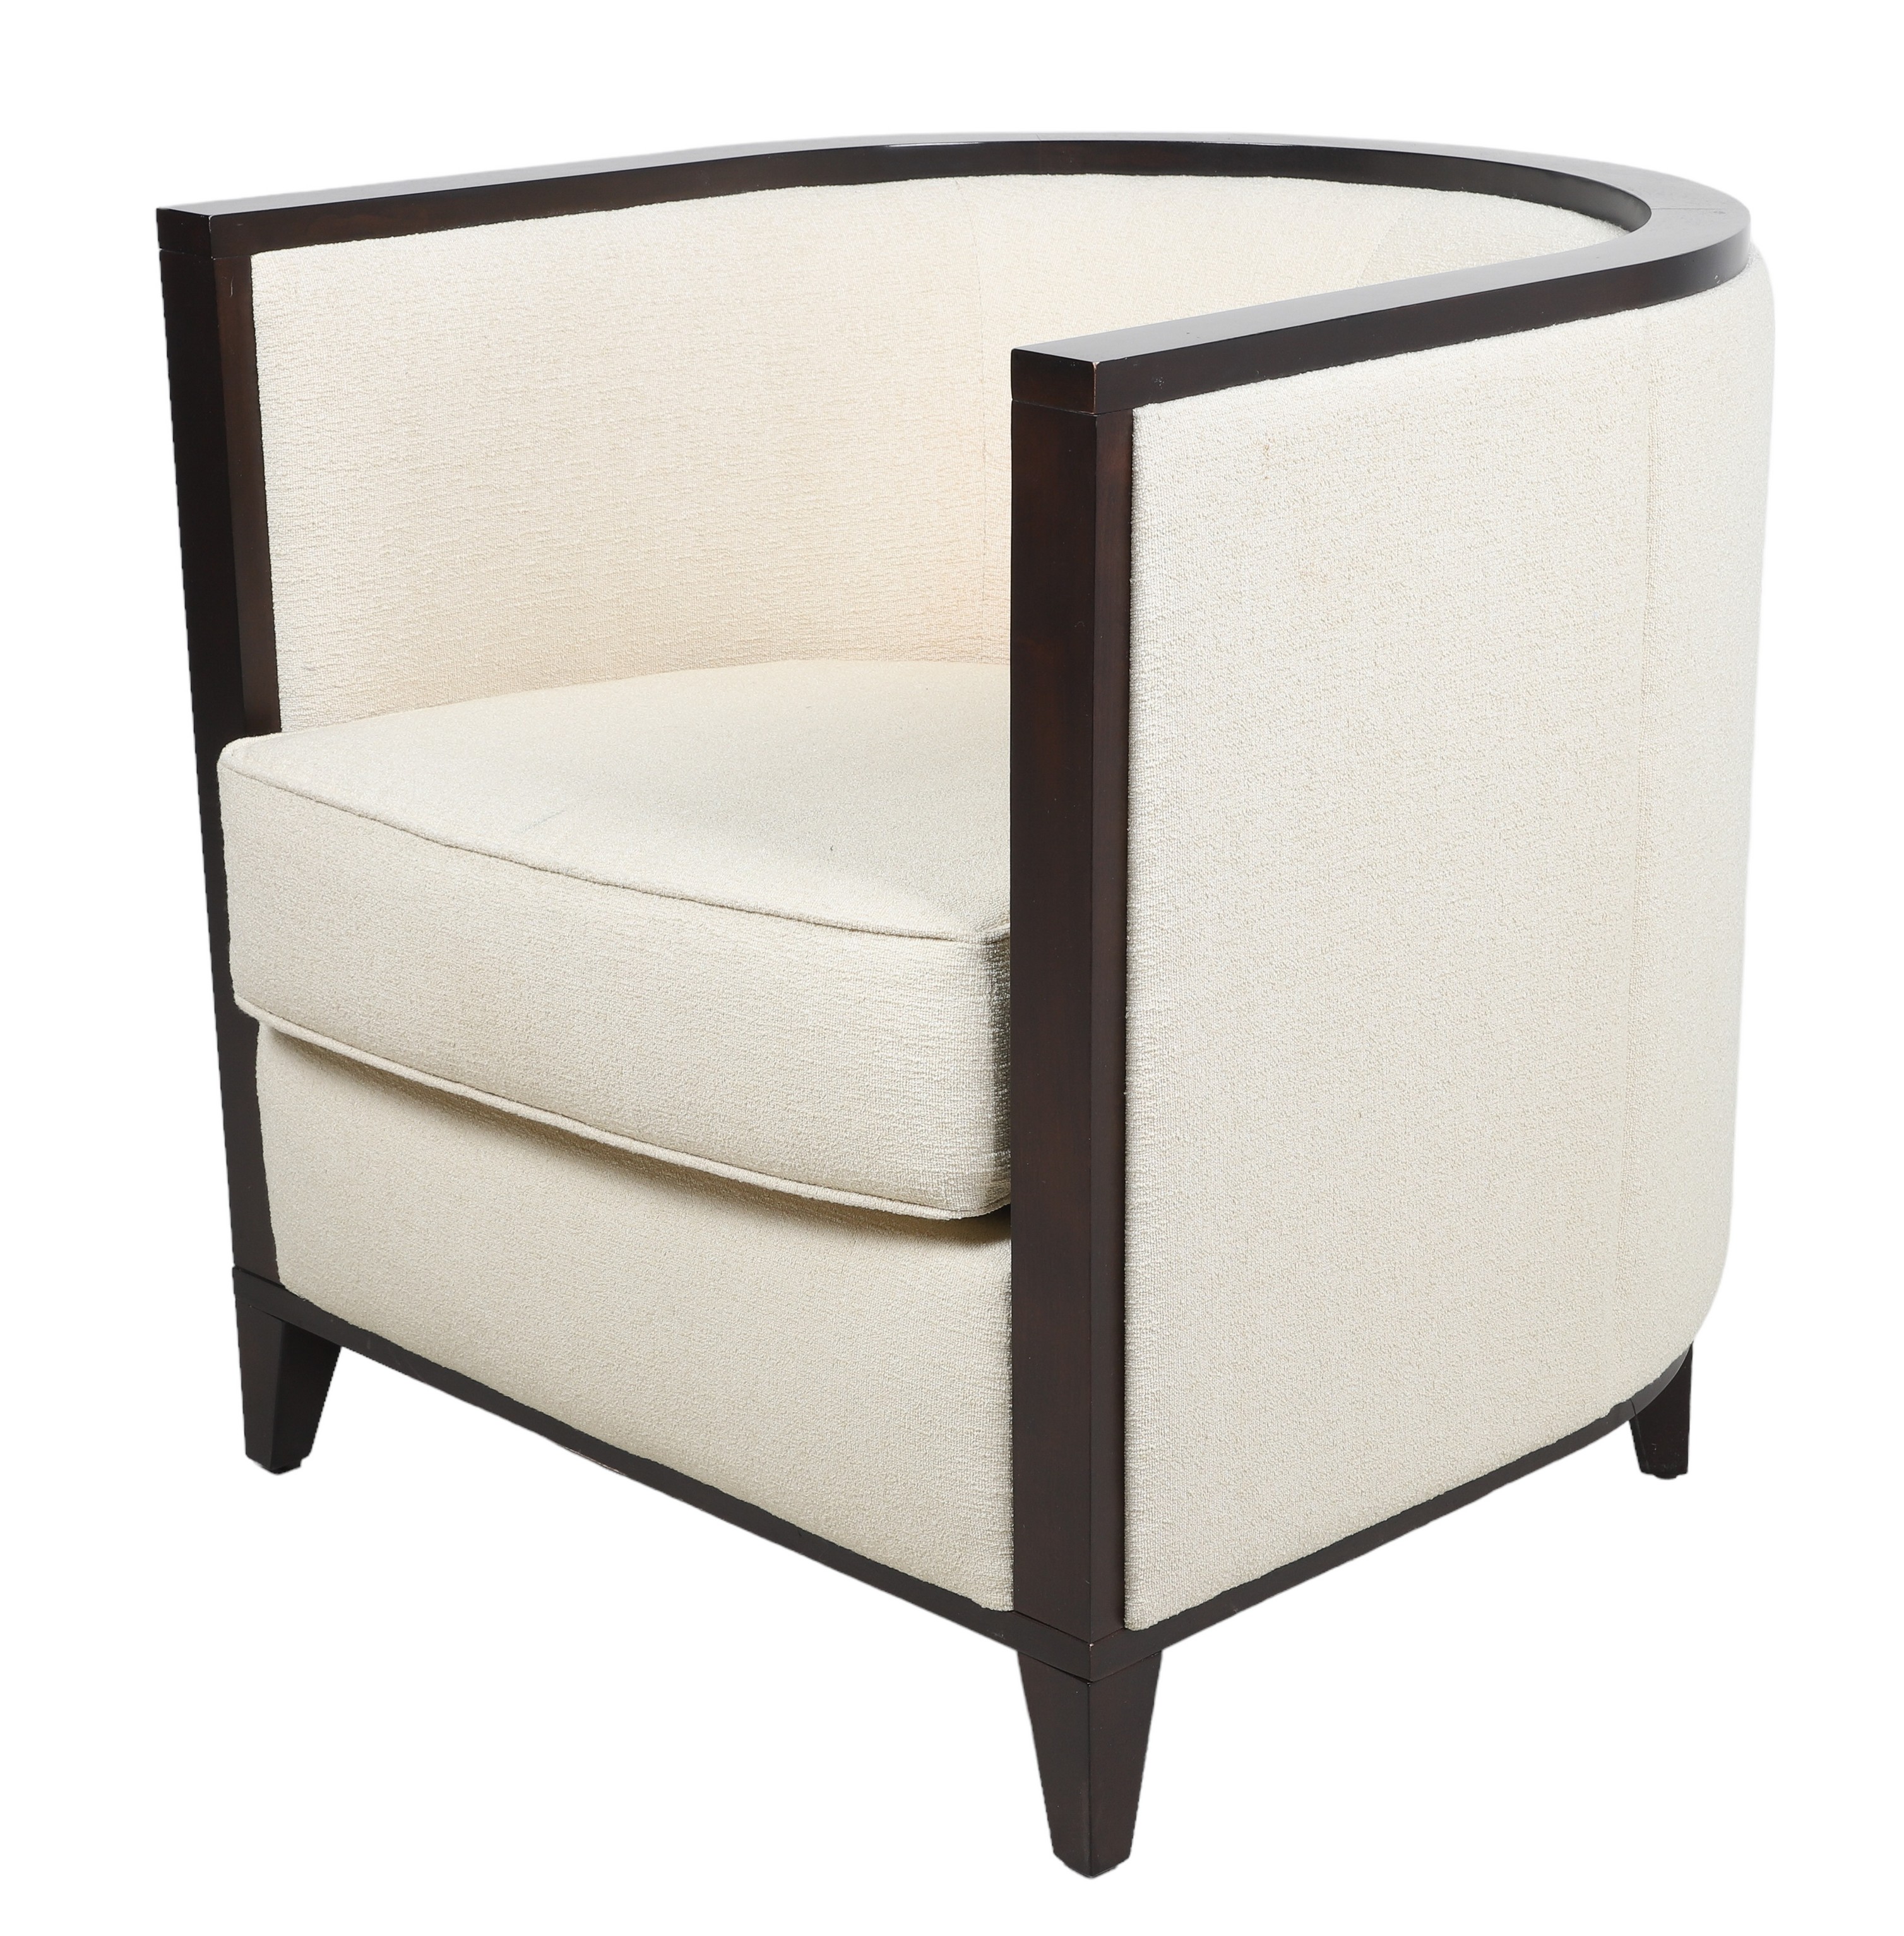 Better by Design Contemporary upholstered